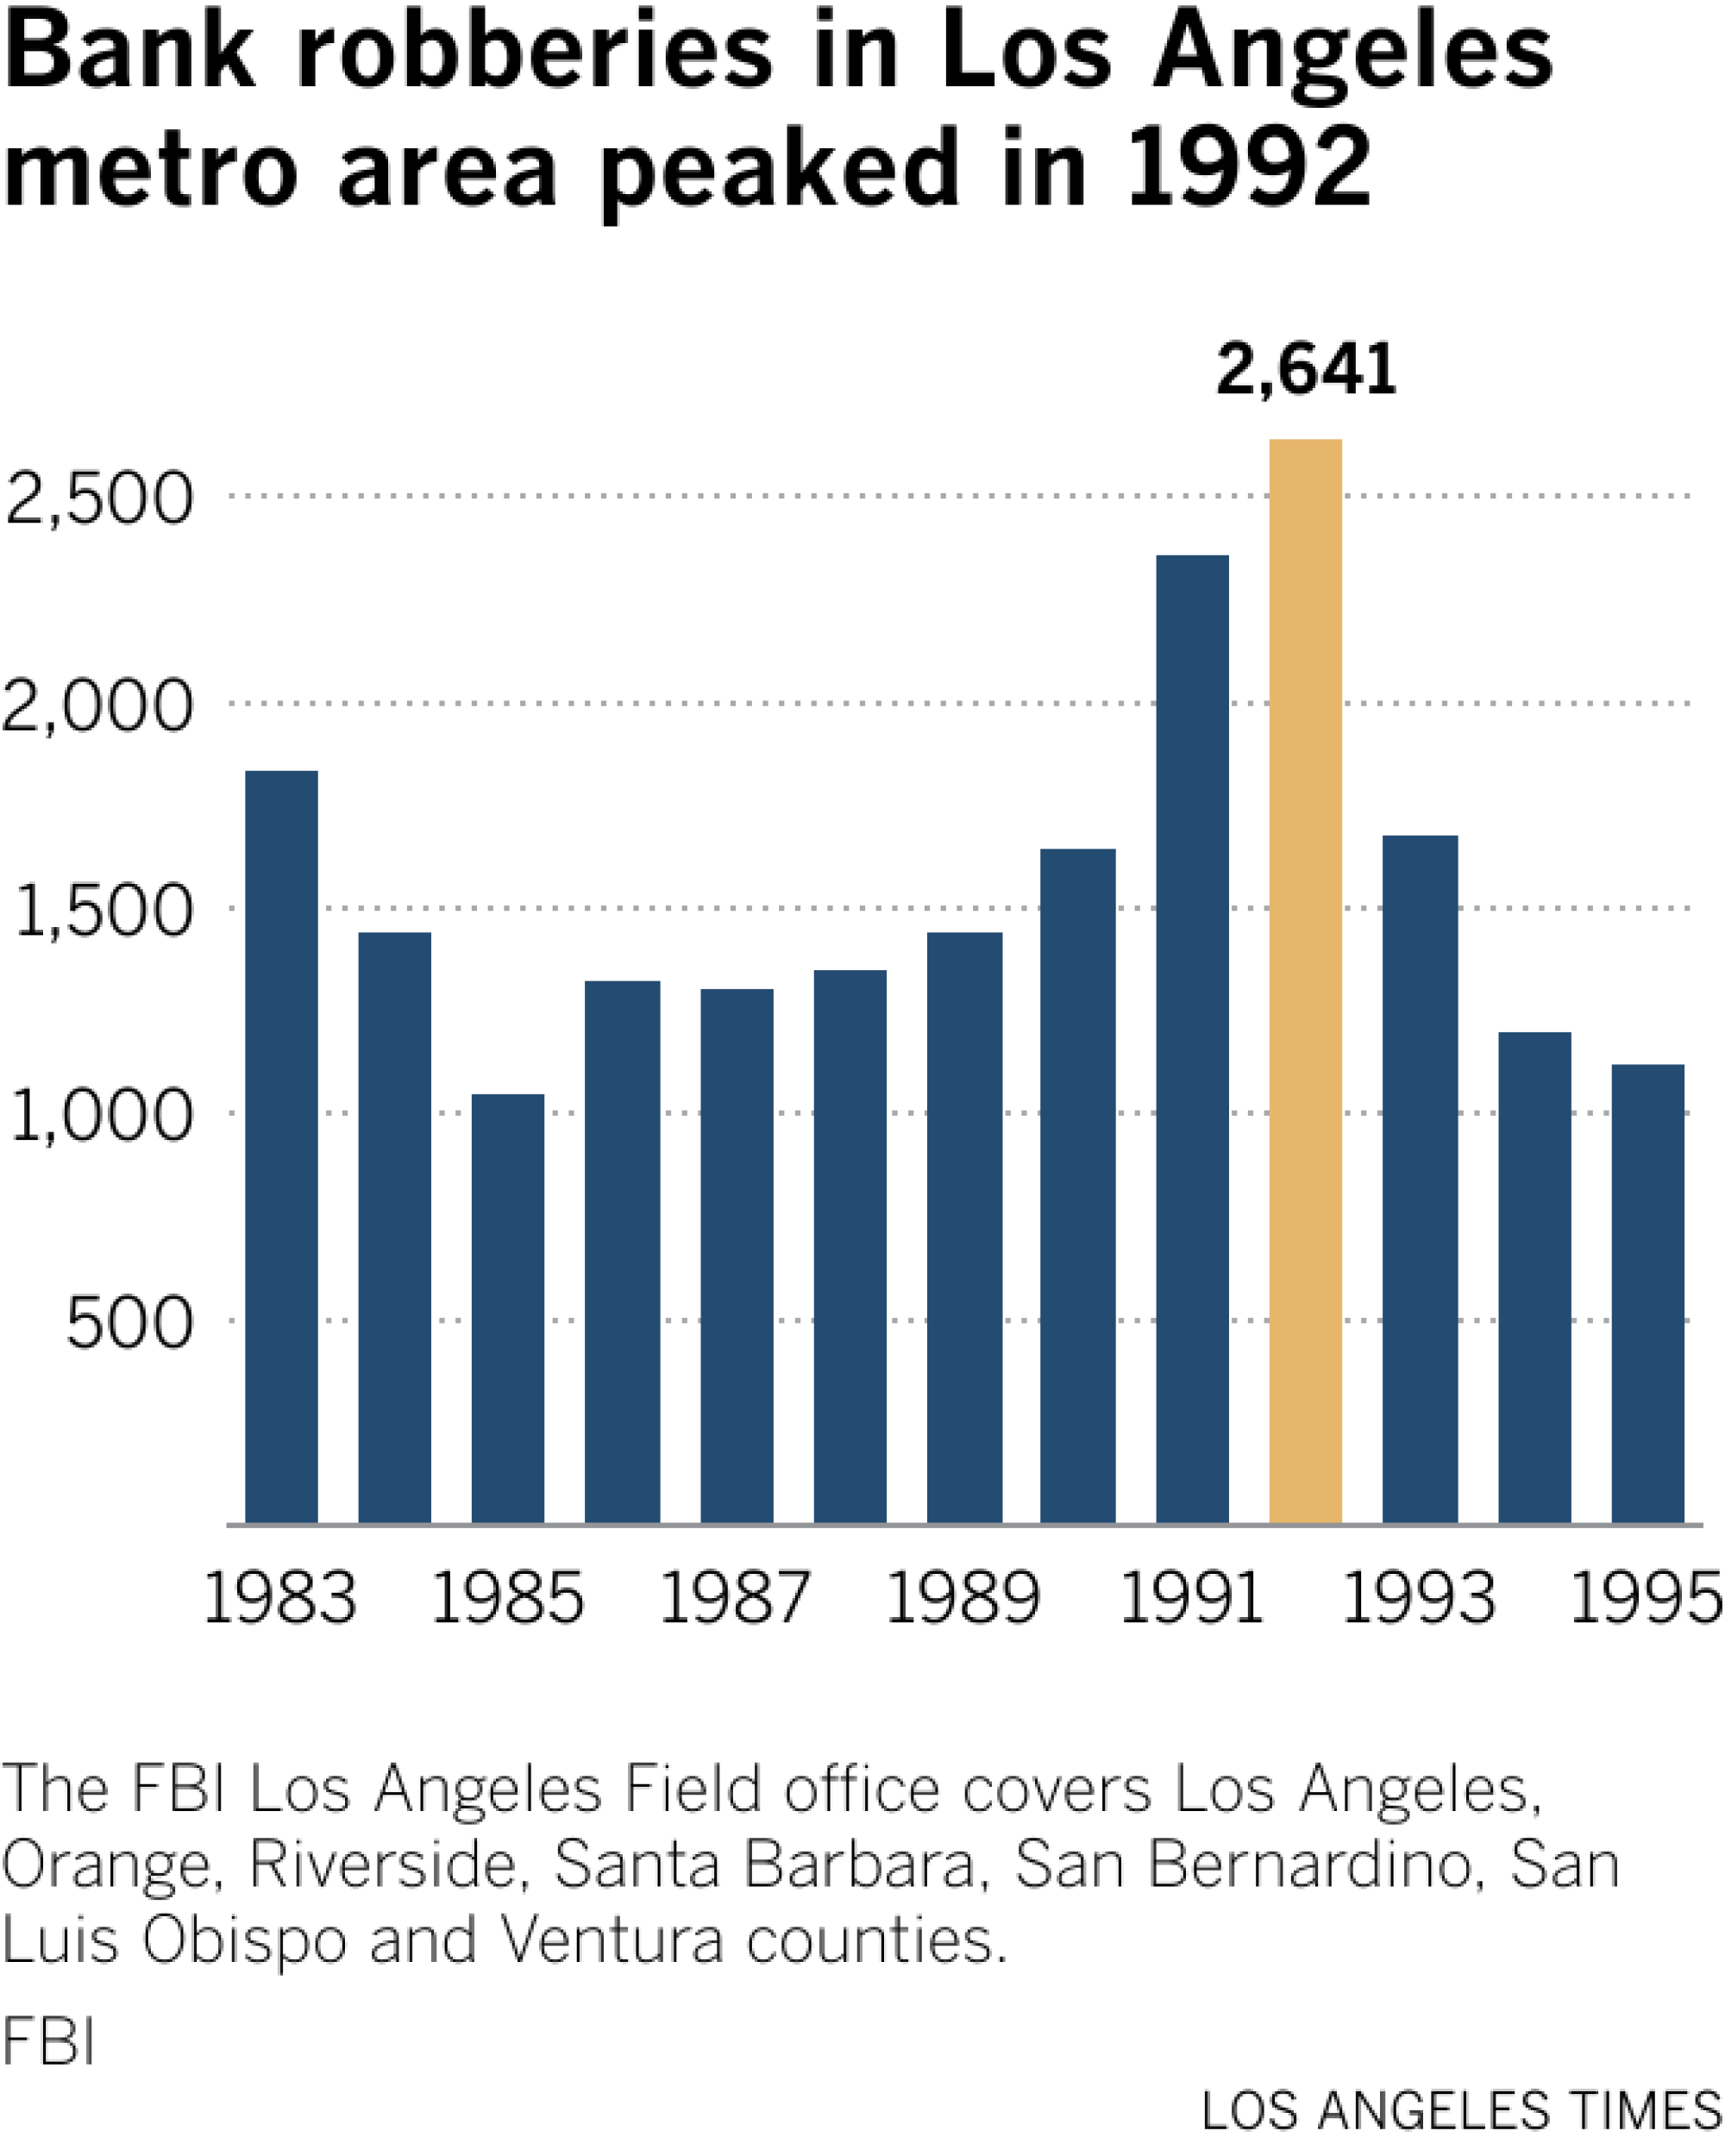 Line chart shows bank robberies in the Los Angeles metro area from 1983 to 1995. In 1992, robberies the area covered by the FBI's Los Angeles Field office peaked at 1,641 that year.